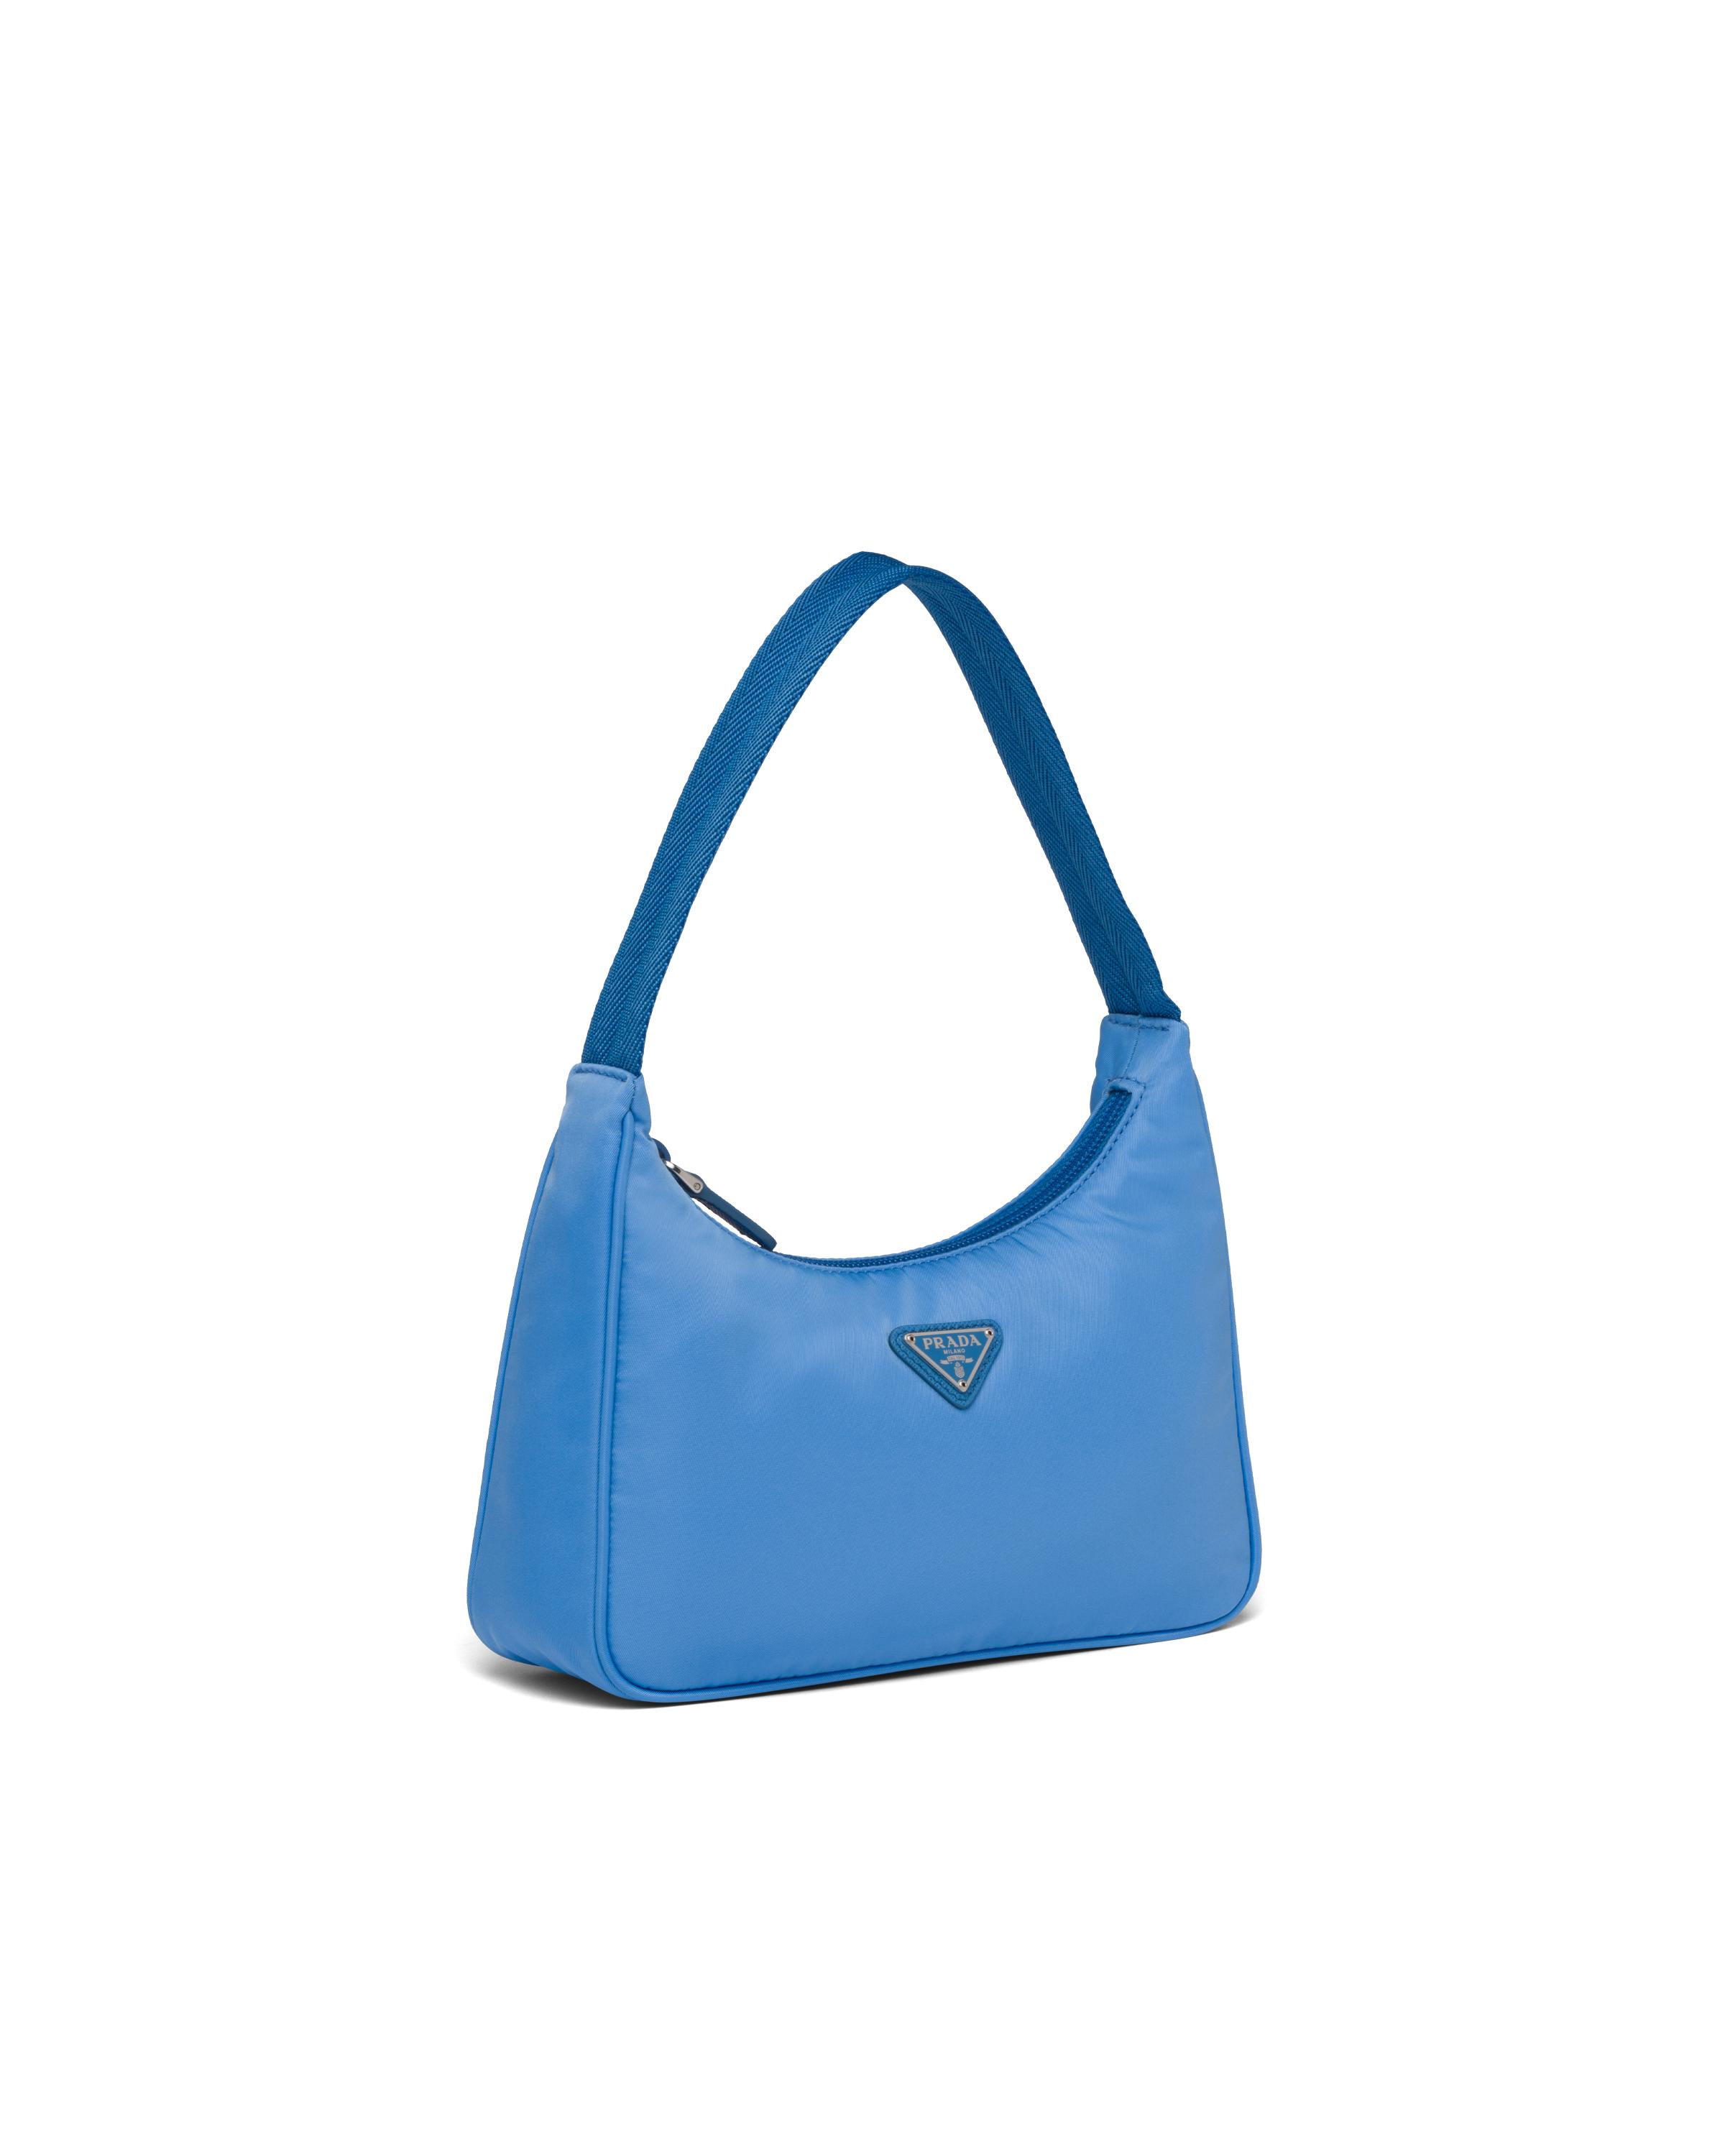 Prada Synthetic Re-edition 2000 Nylon Mini Bag in Periwinkle Blue (Blue) |  Lyst